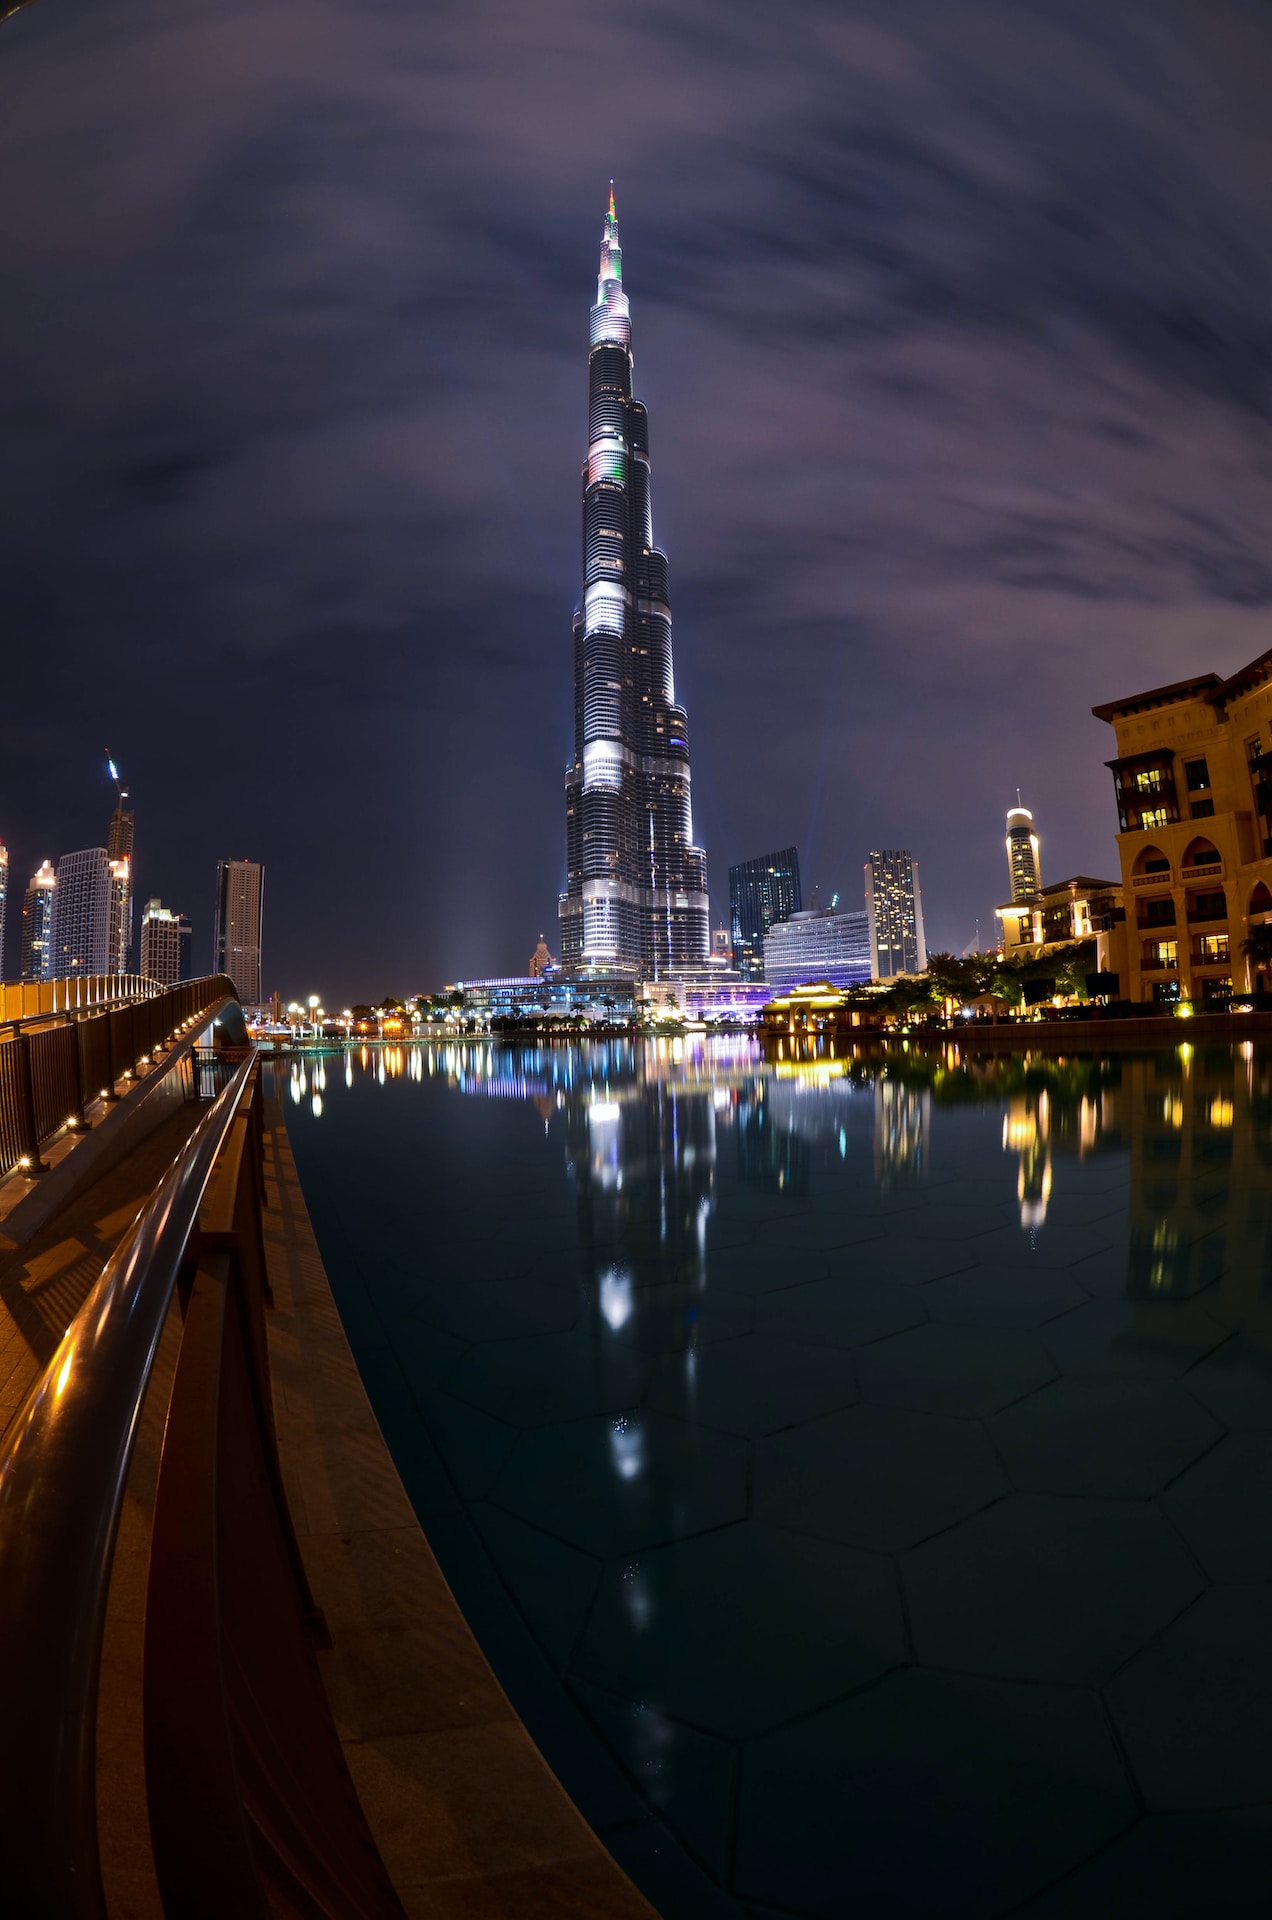 Where is the Best Place to Buy Property in Dubai?